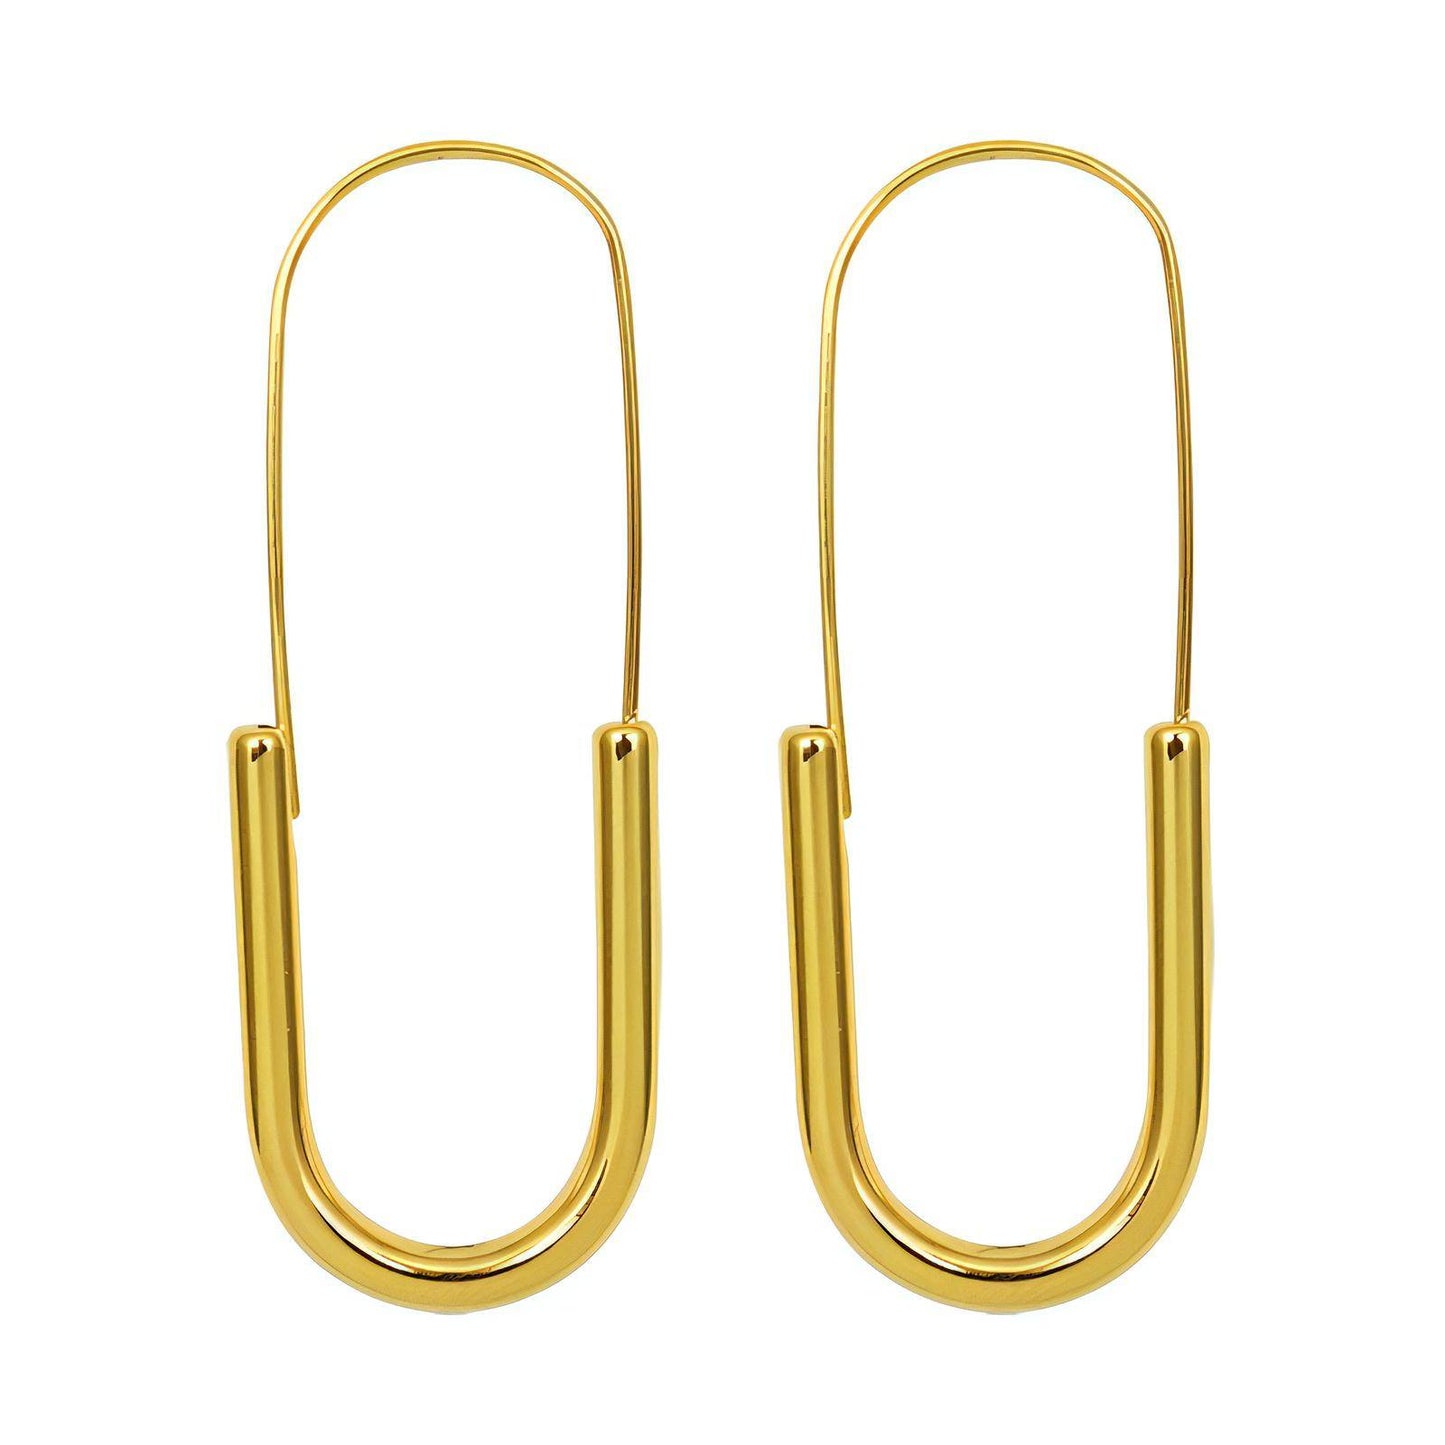 18K gold plated Stainless steel  Safety pin earrings